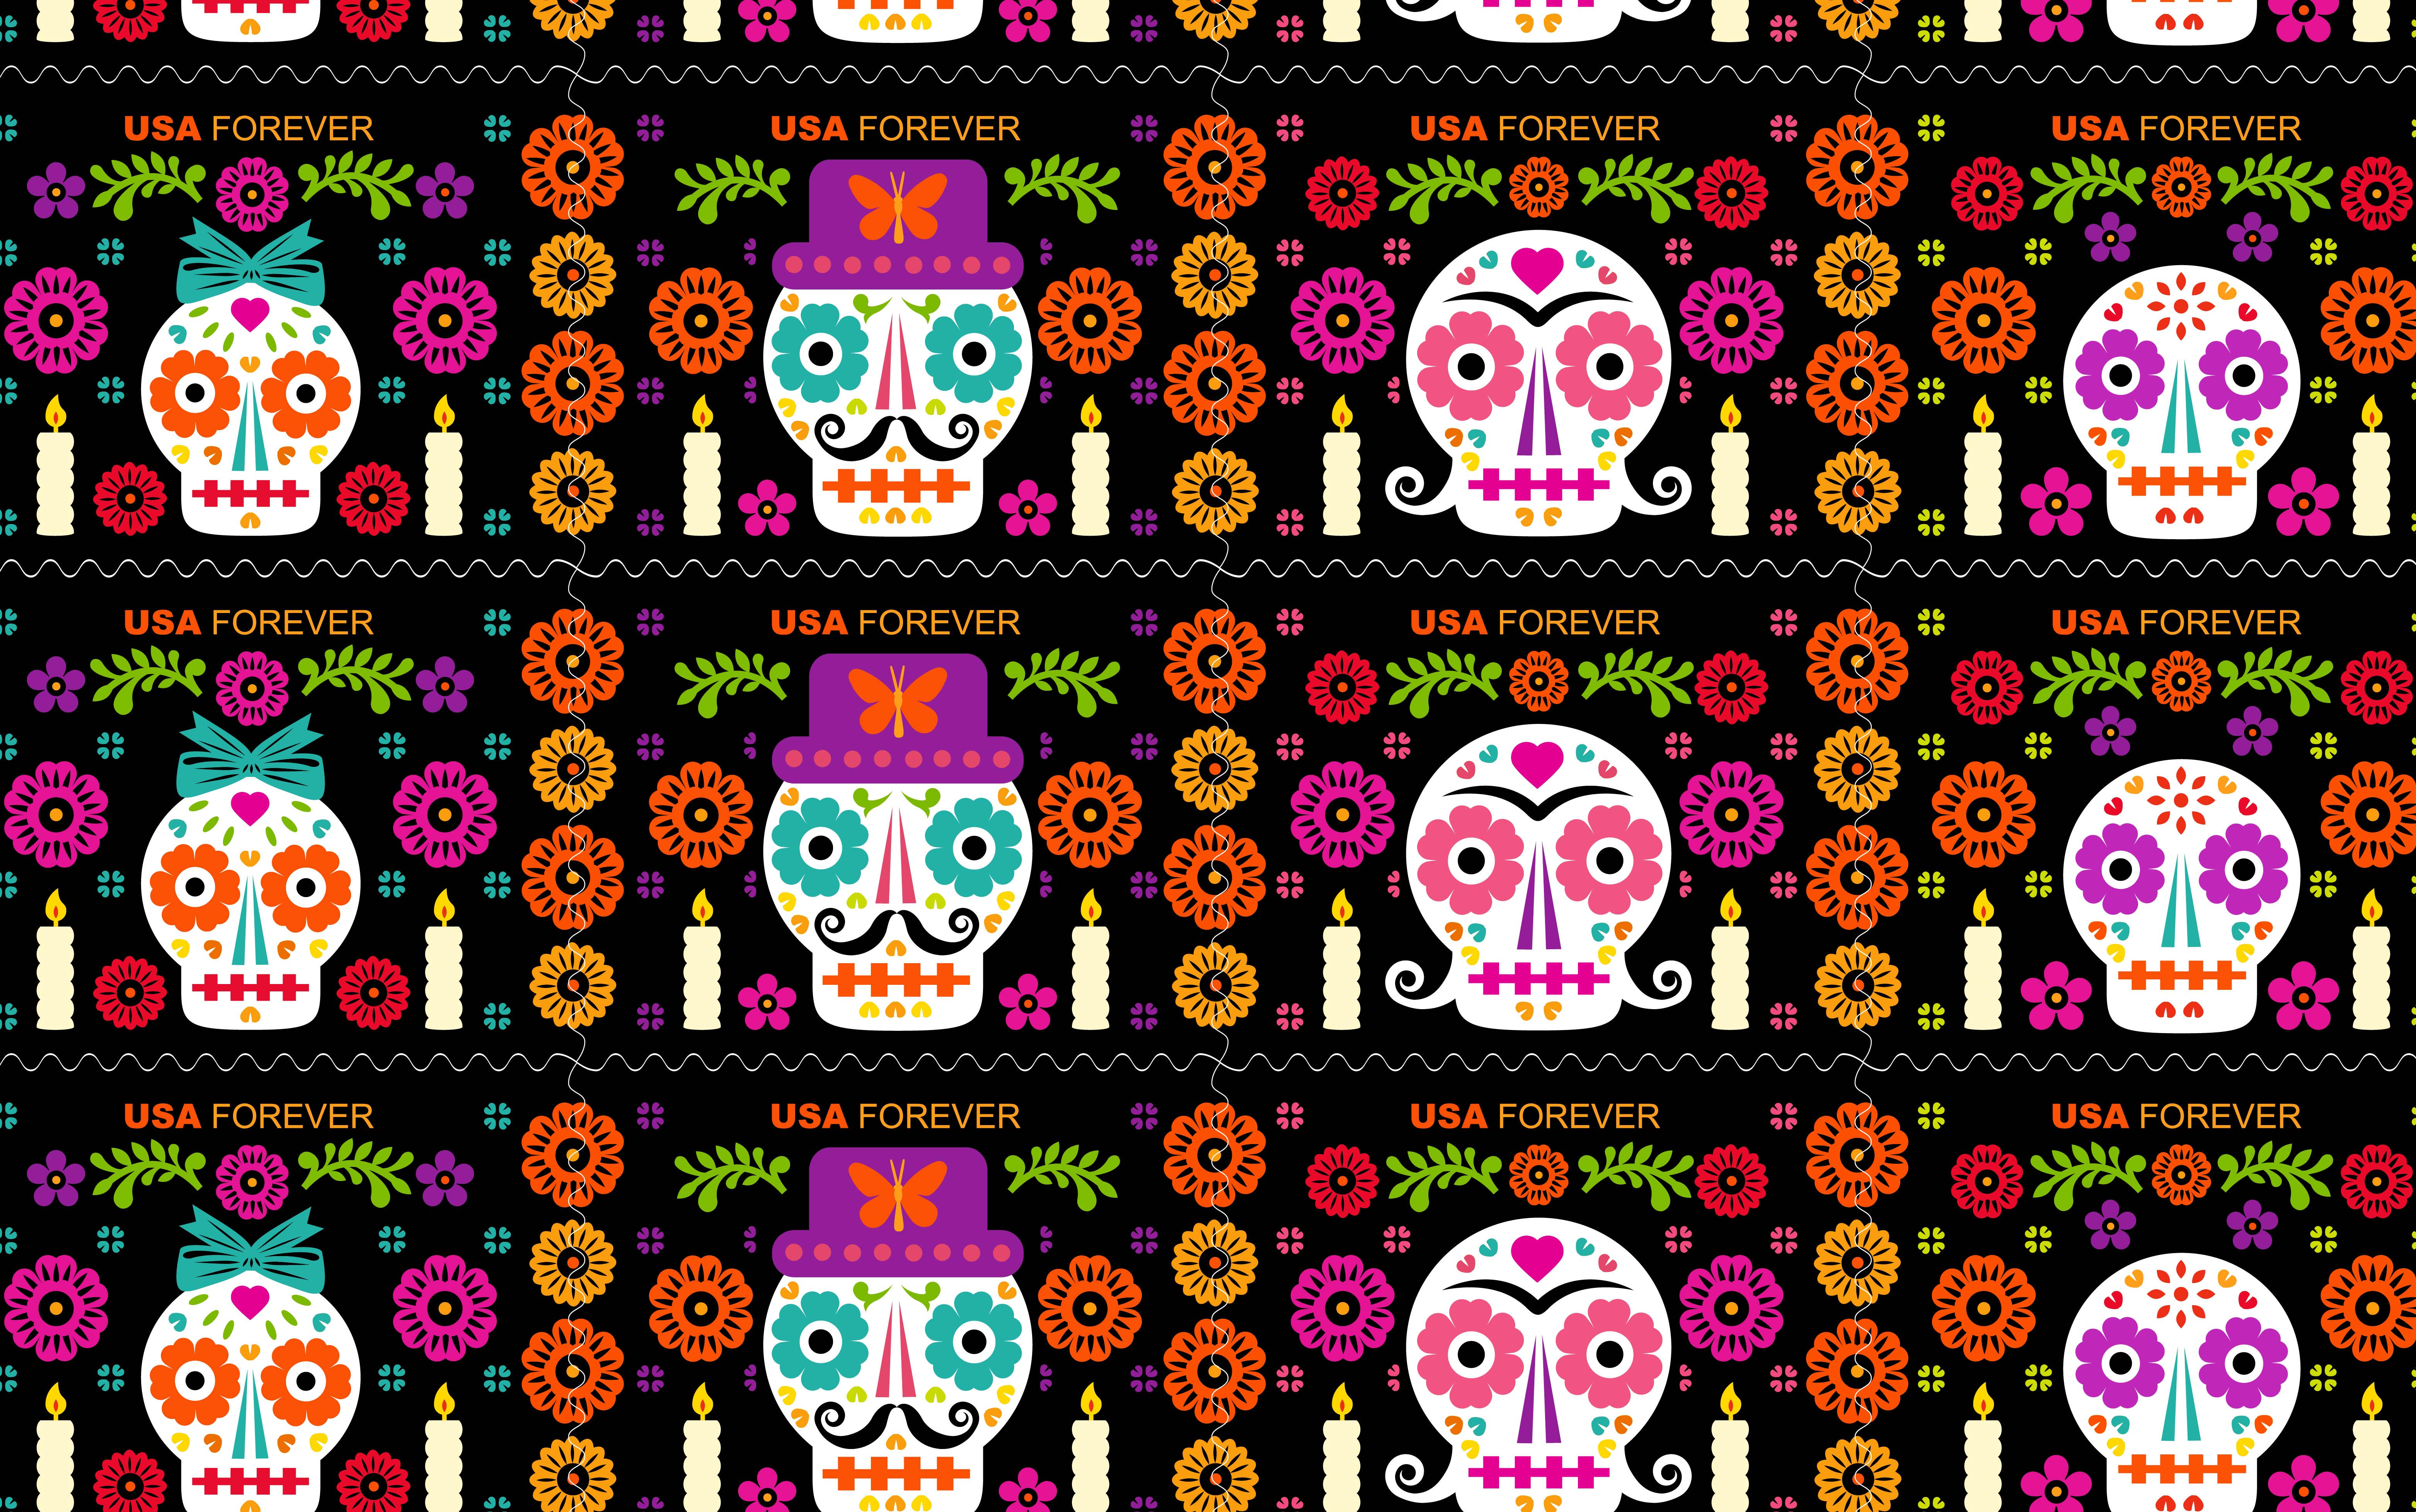 United States Postal Service stamps design for Day of the Dead. Stamp designs by Luis Fitch from UNO Branding.